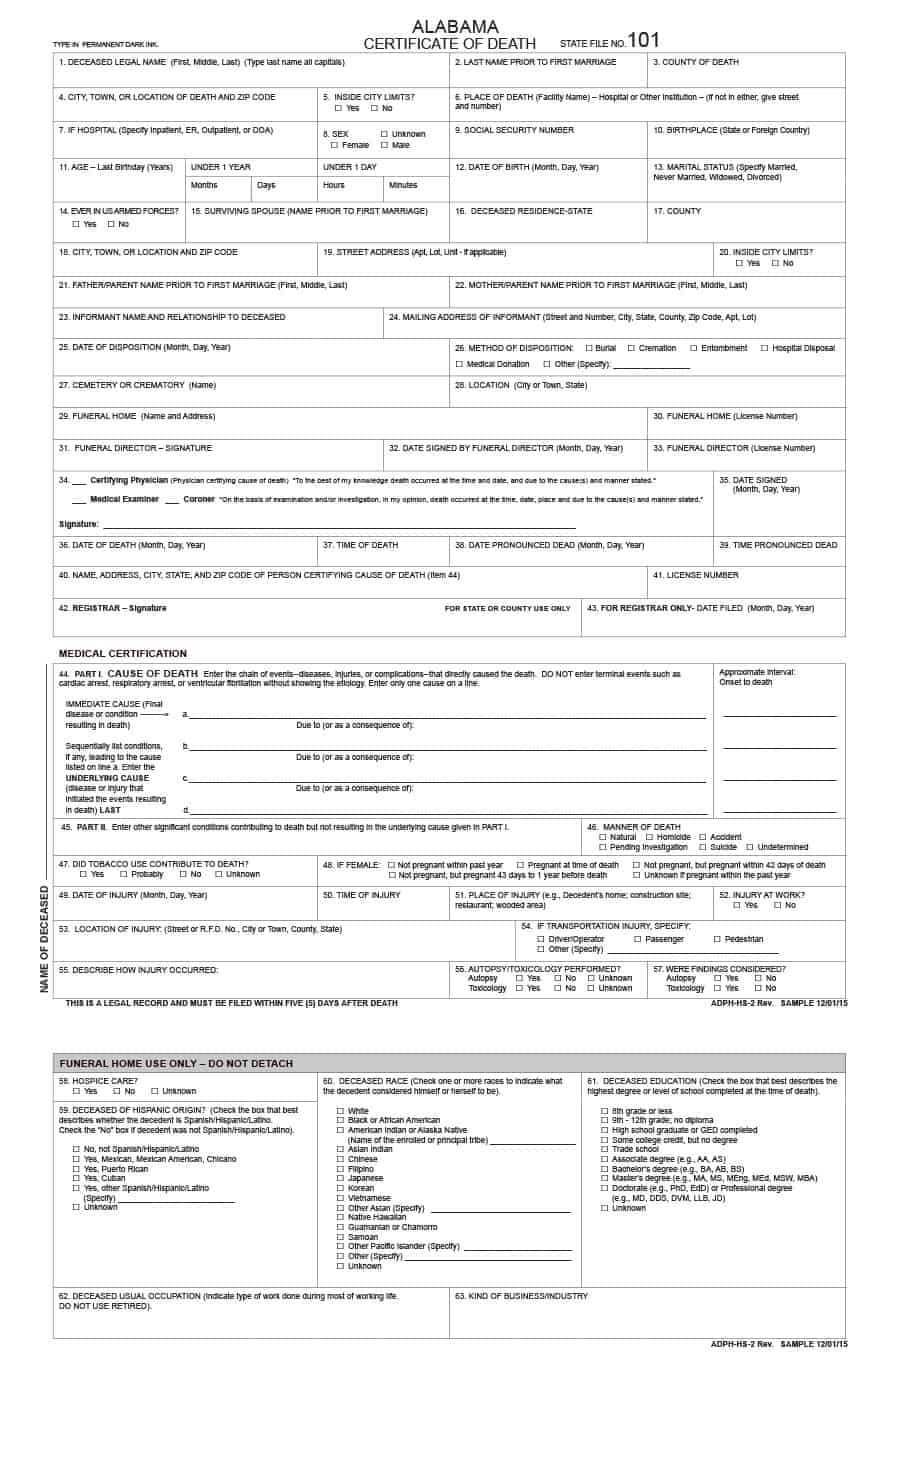 37 Blank Death Certificate Templates [100% Free] ᐅ Template Lab Pertaining To Free Fake Medical Certificate Template